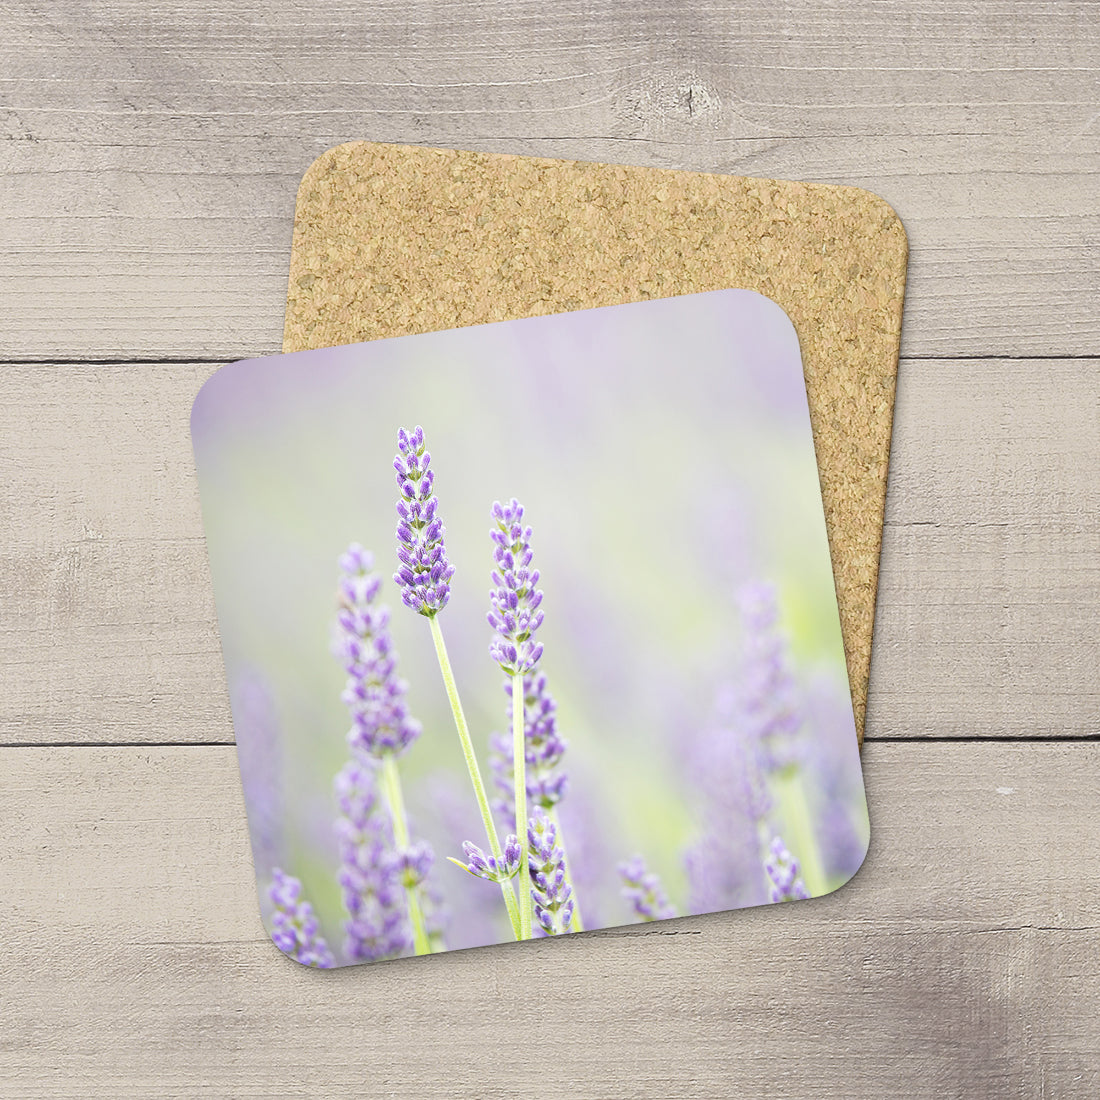 Image of stalks of lavender flowers blooming in a sea of purple. Printed on Cork Coasters by Edmonton photographer Larry Jang